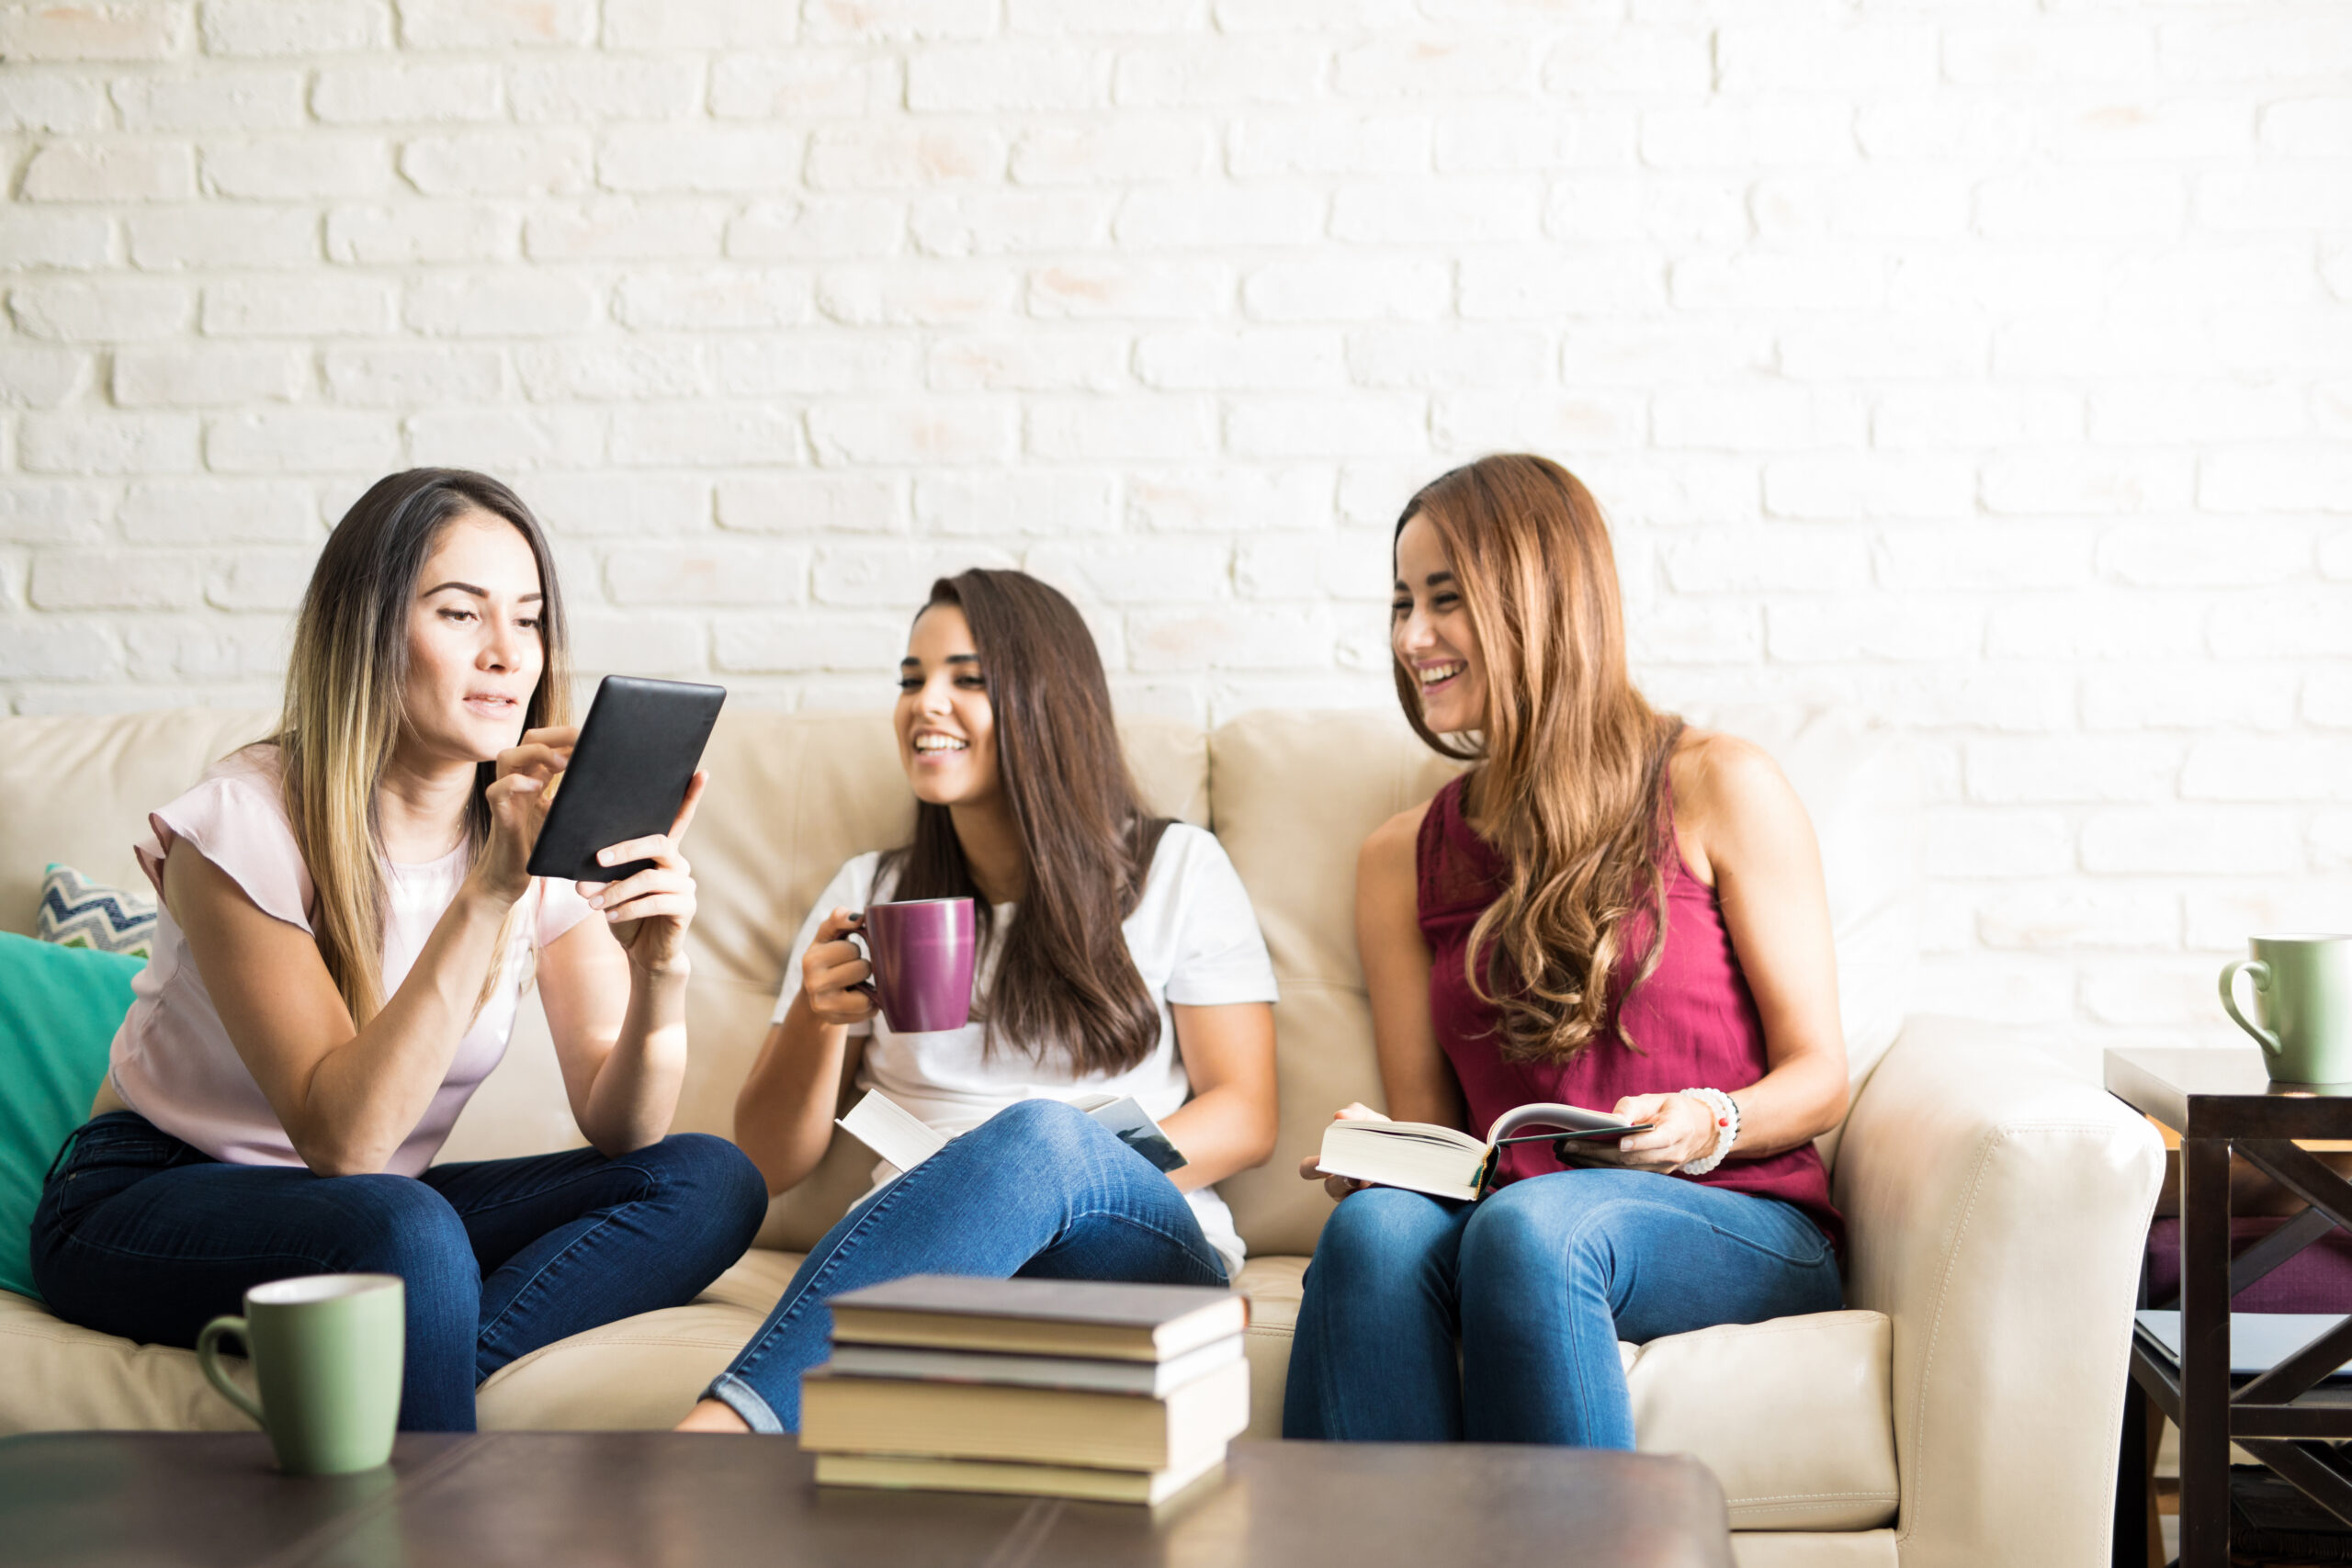 Three women sit on a sofa discussing the book they are currently reading.